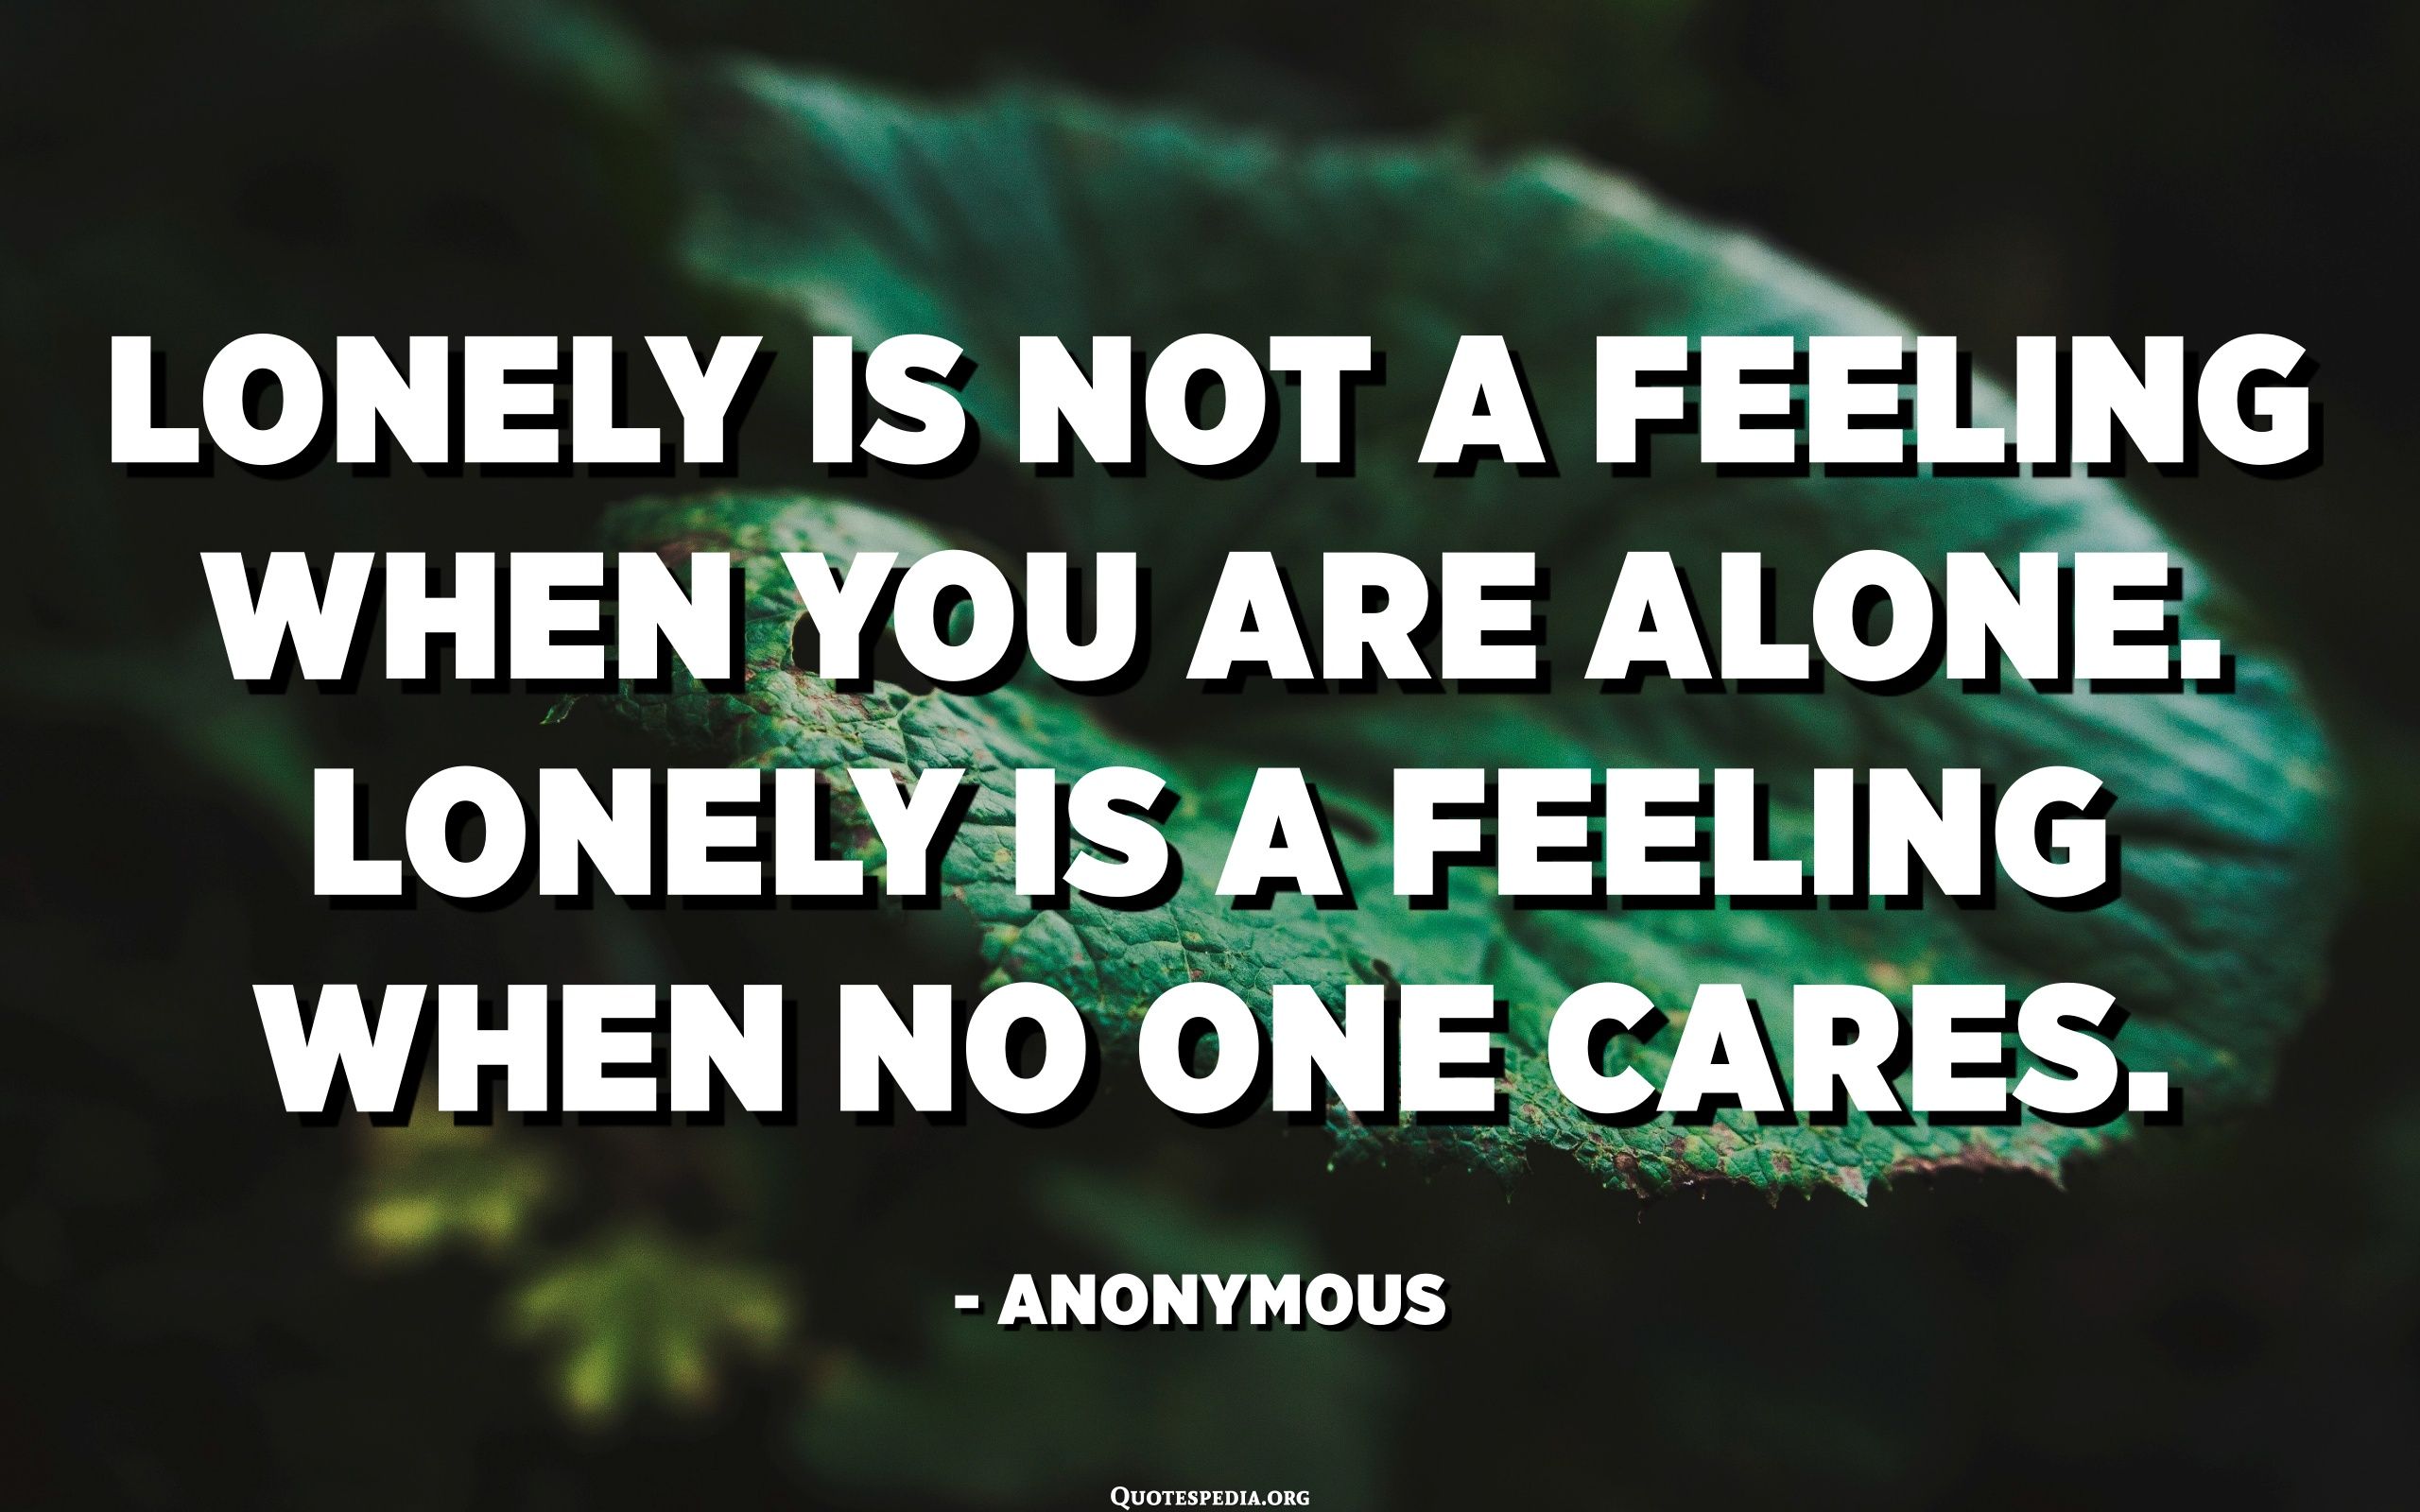 Lonely is not a feeling when you are alone. Lonely is a feeling when no one cares